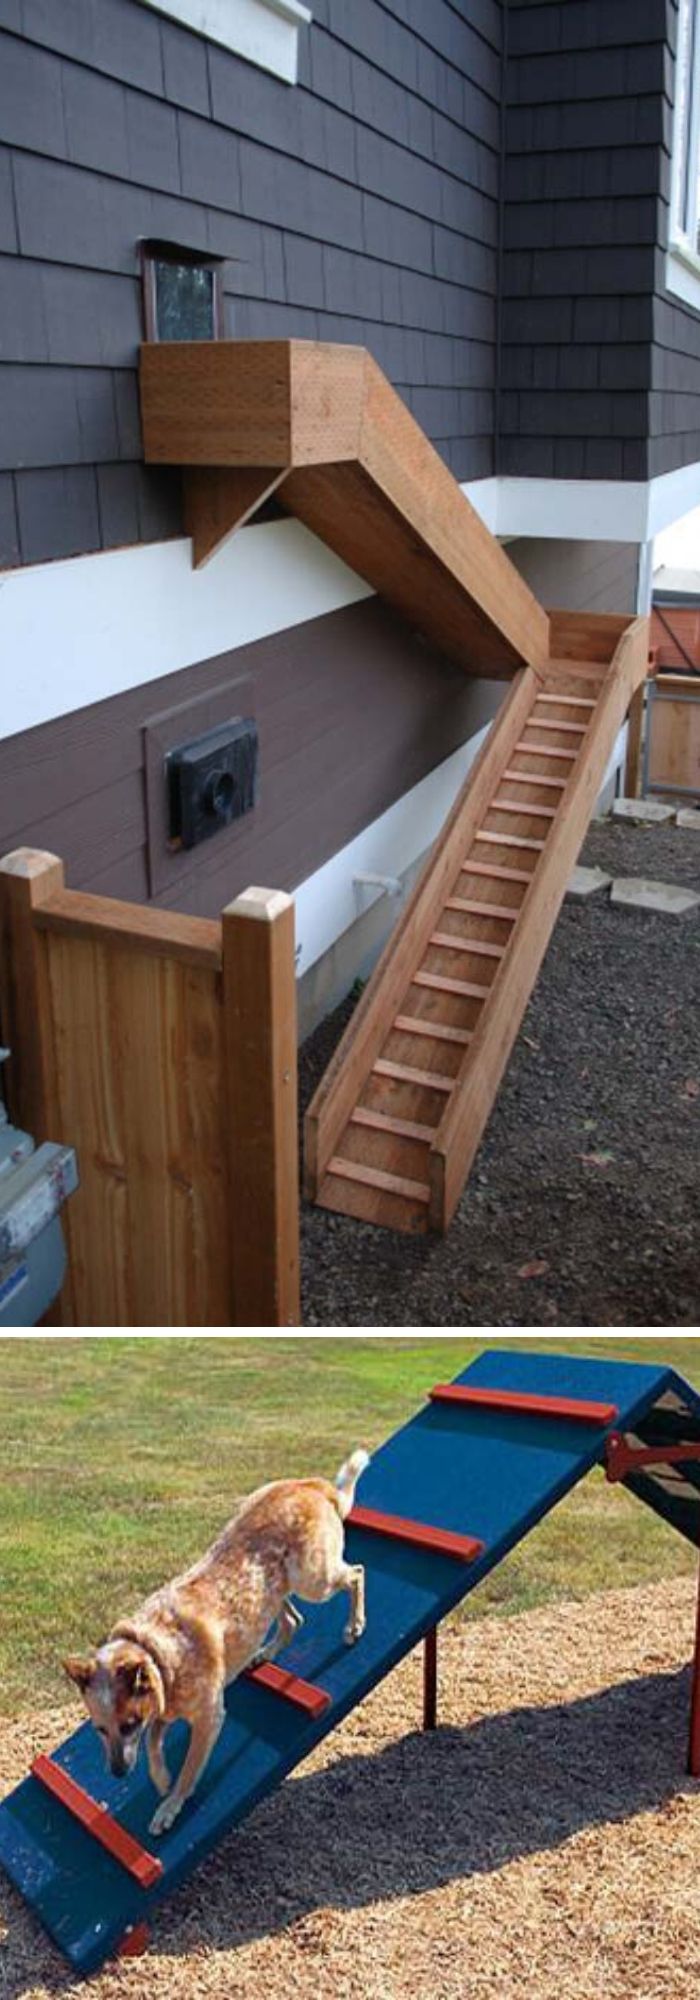 20 backyard projects for dogs